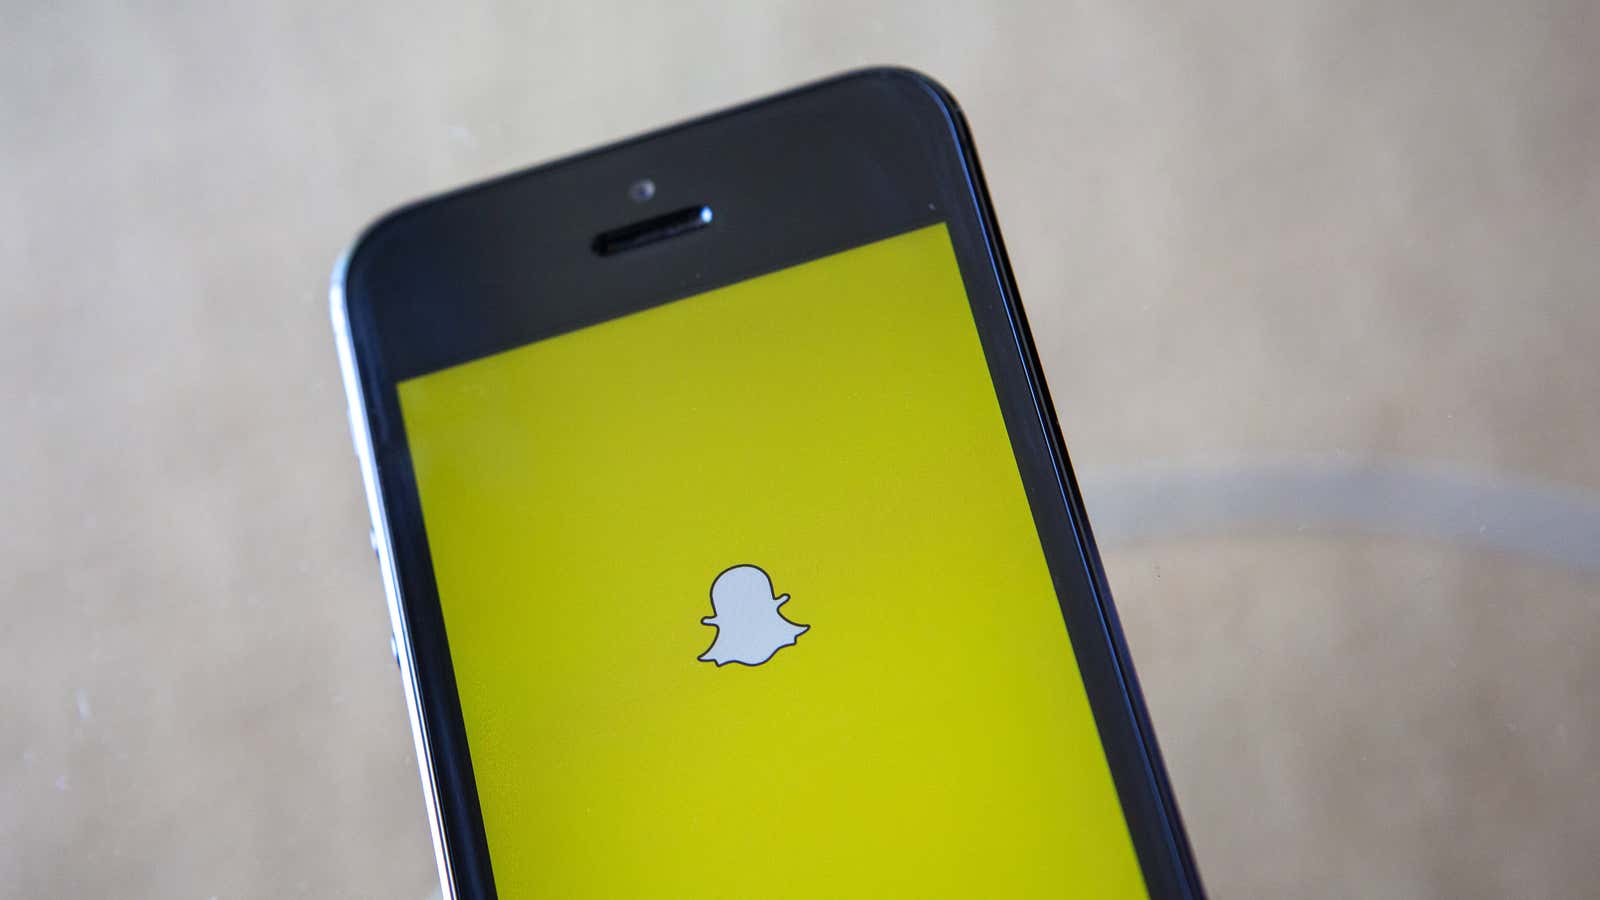 Snapchat hopes that its lofty valuation will last forever.